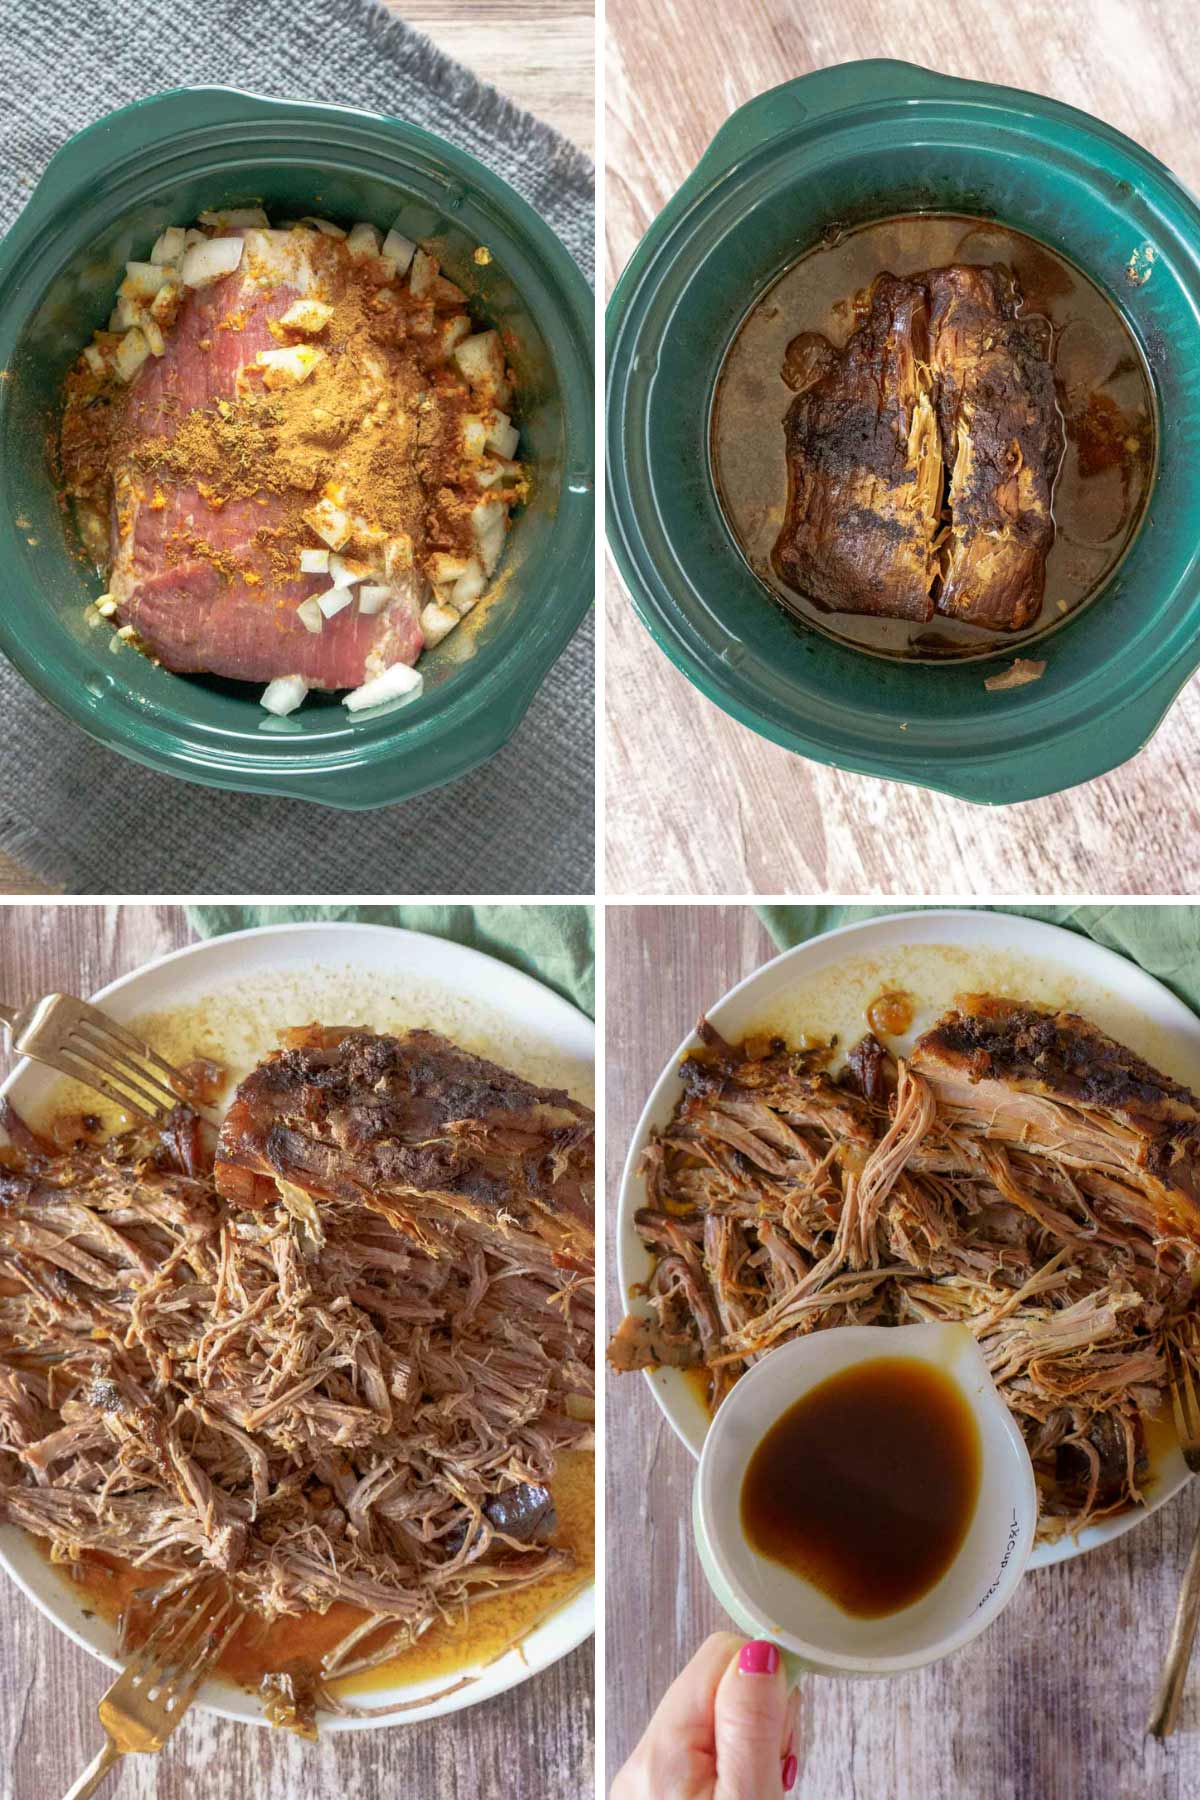 Add ingredients to a slow cooker, shredding the roast beef, and pouring over the gravy.